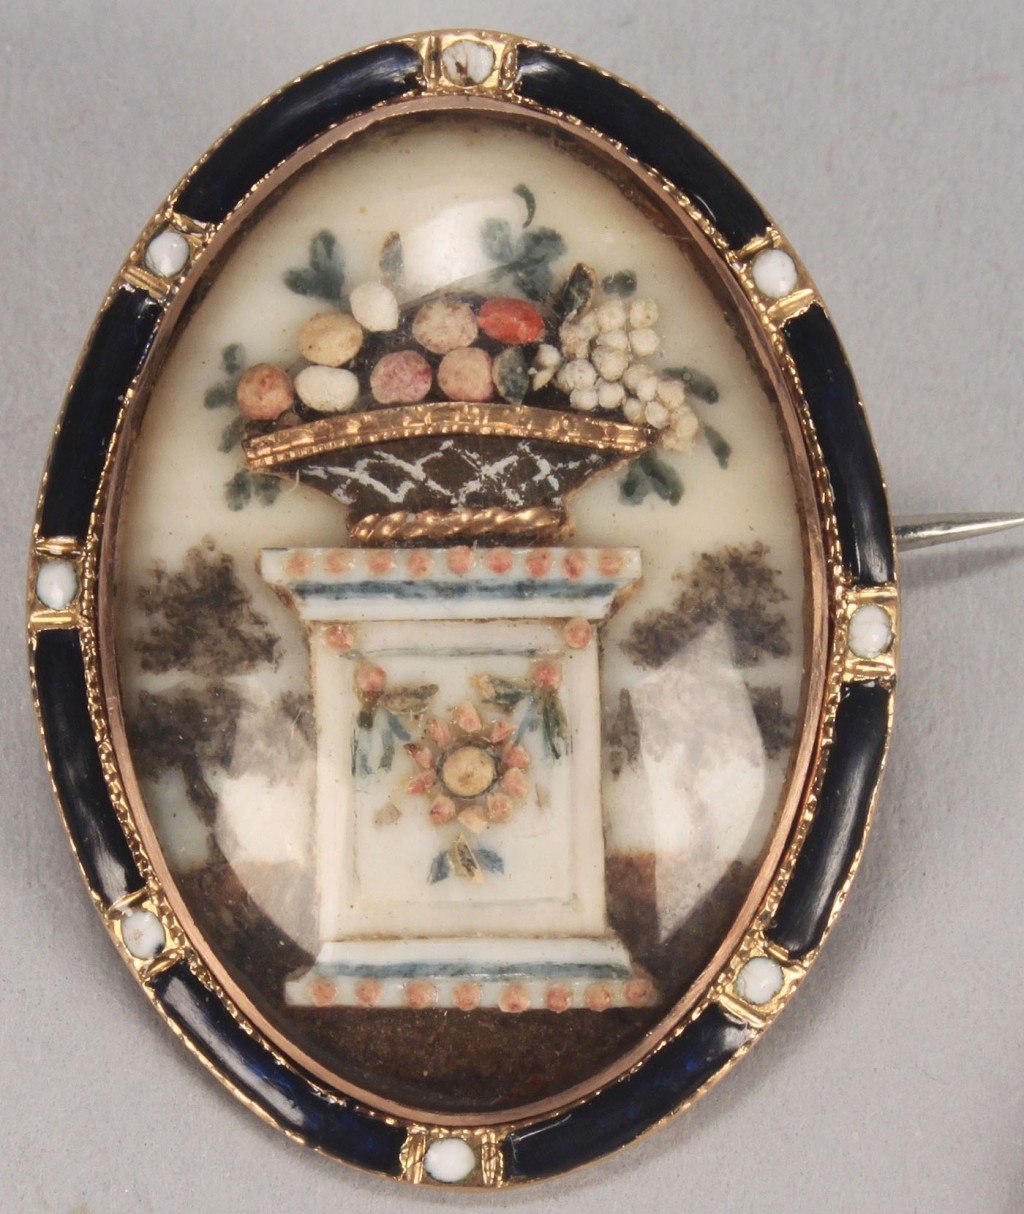 Lot 163: Mourning pin with relief decoration of urn